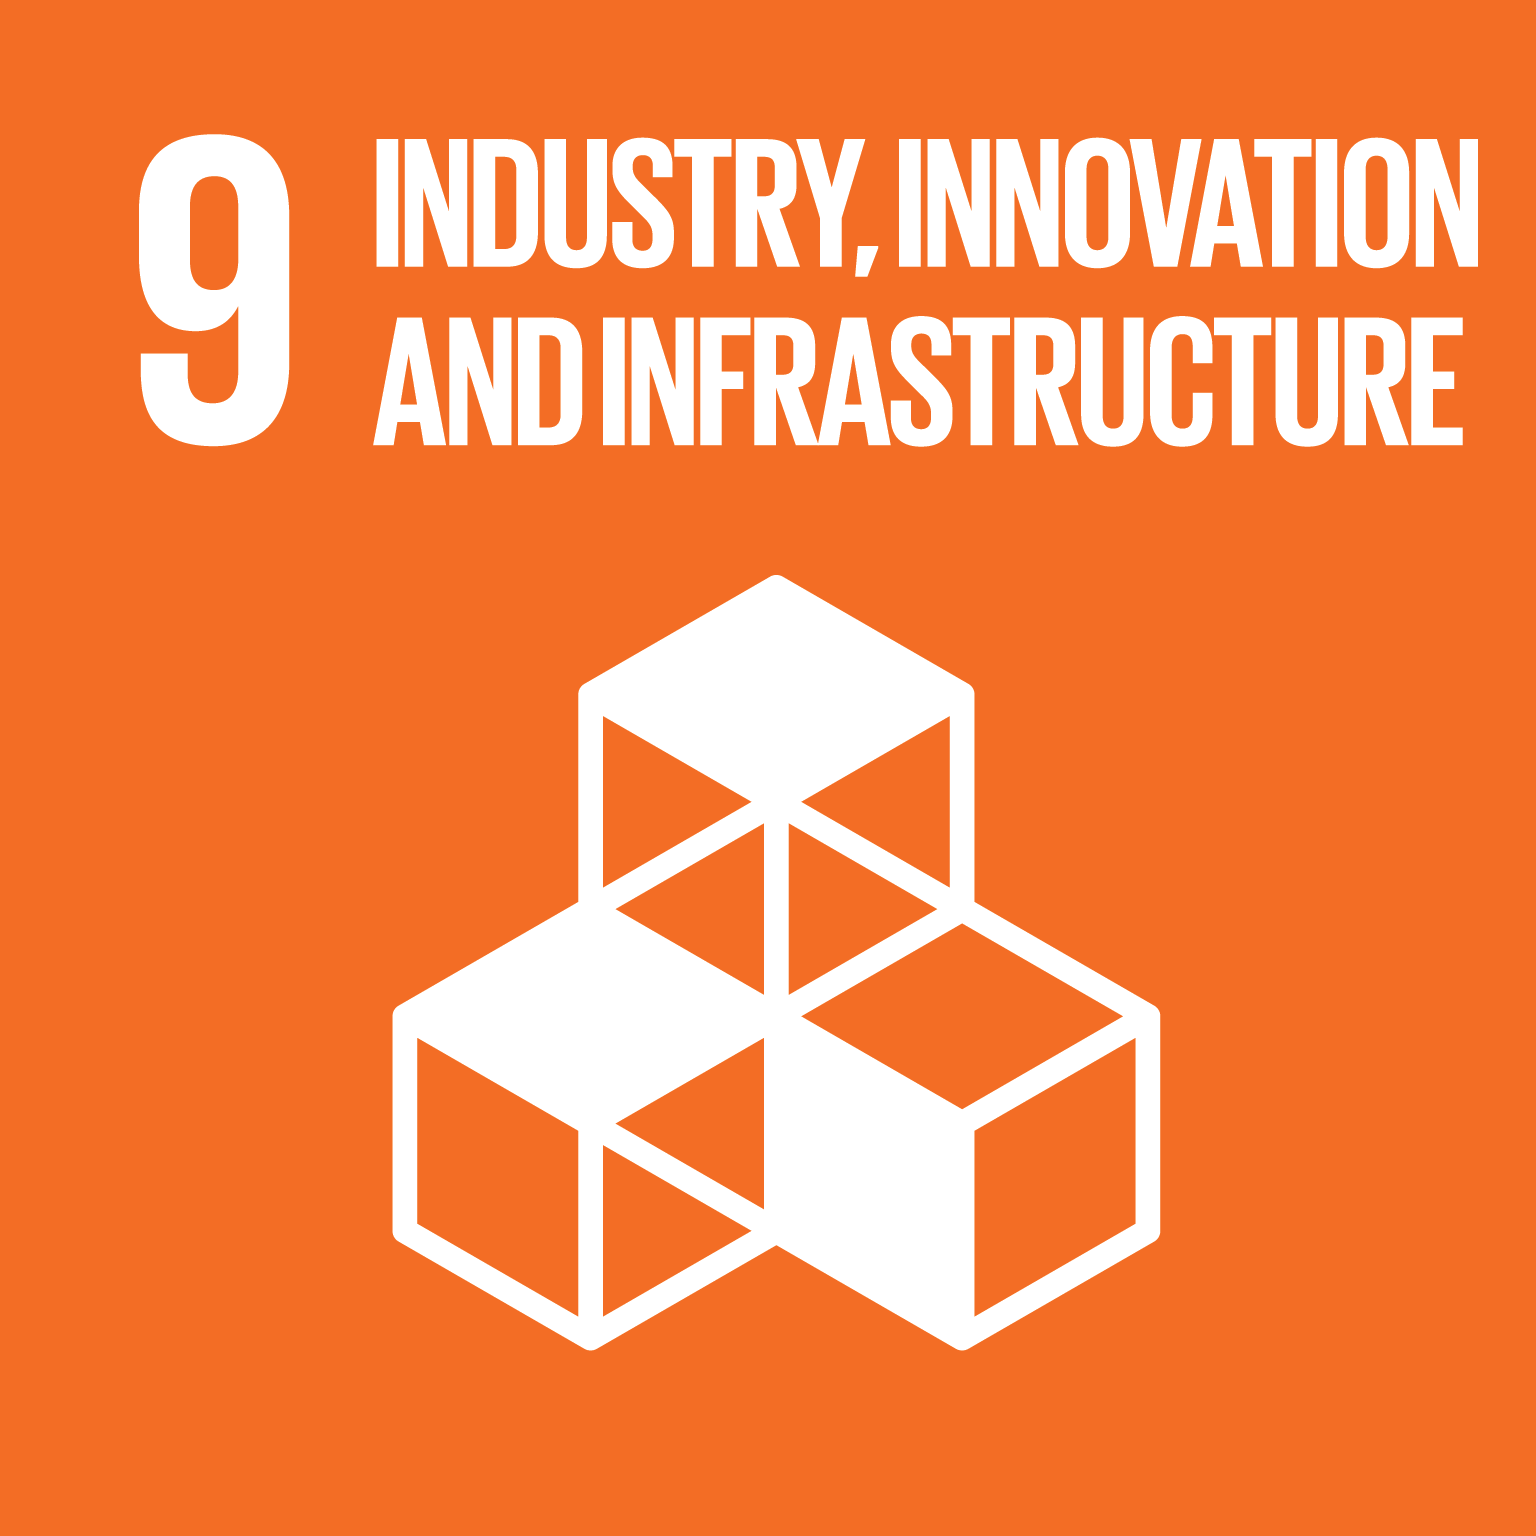 Goal 9: Industry, Innovation, and Infrastructure - Build resilient infrastructure, promote inclusive and sustainable industrialization and foster innovation